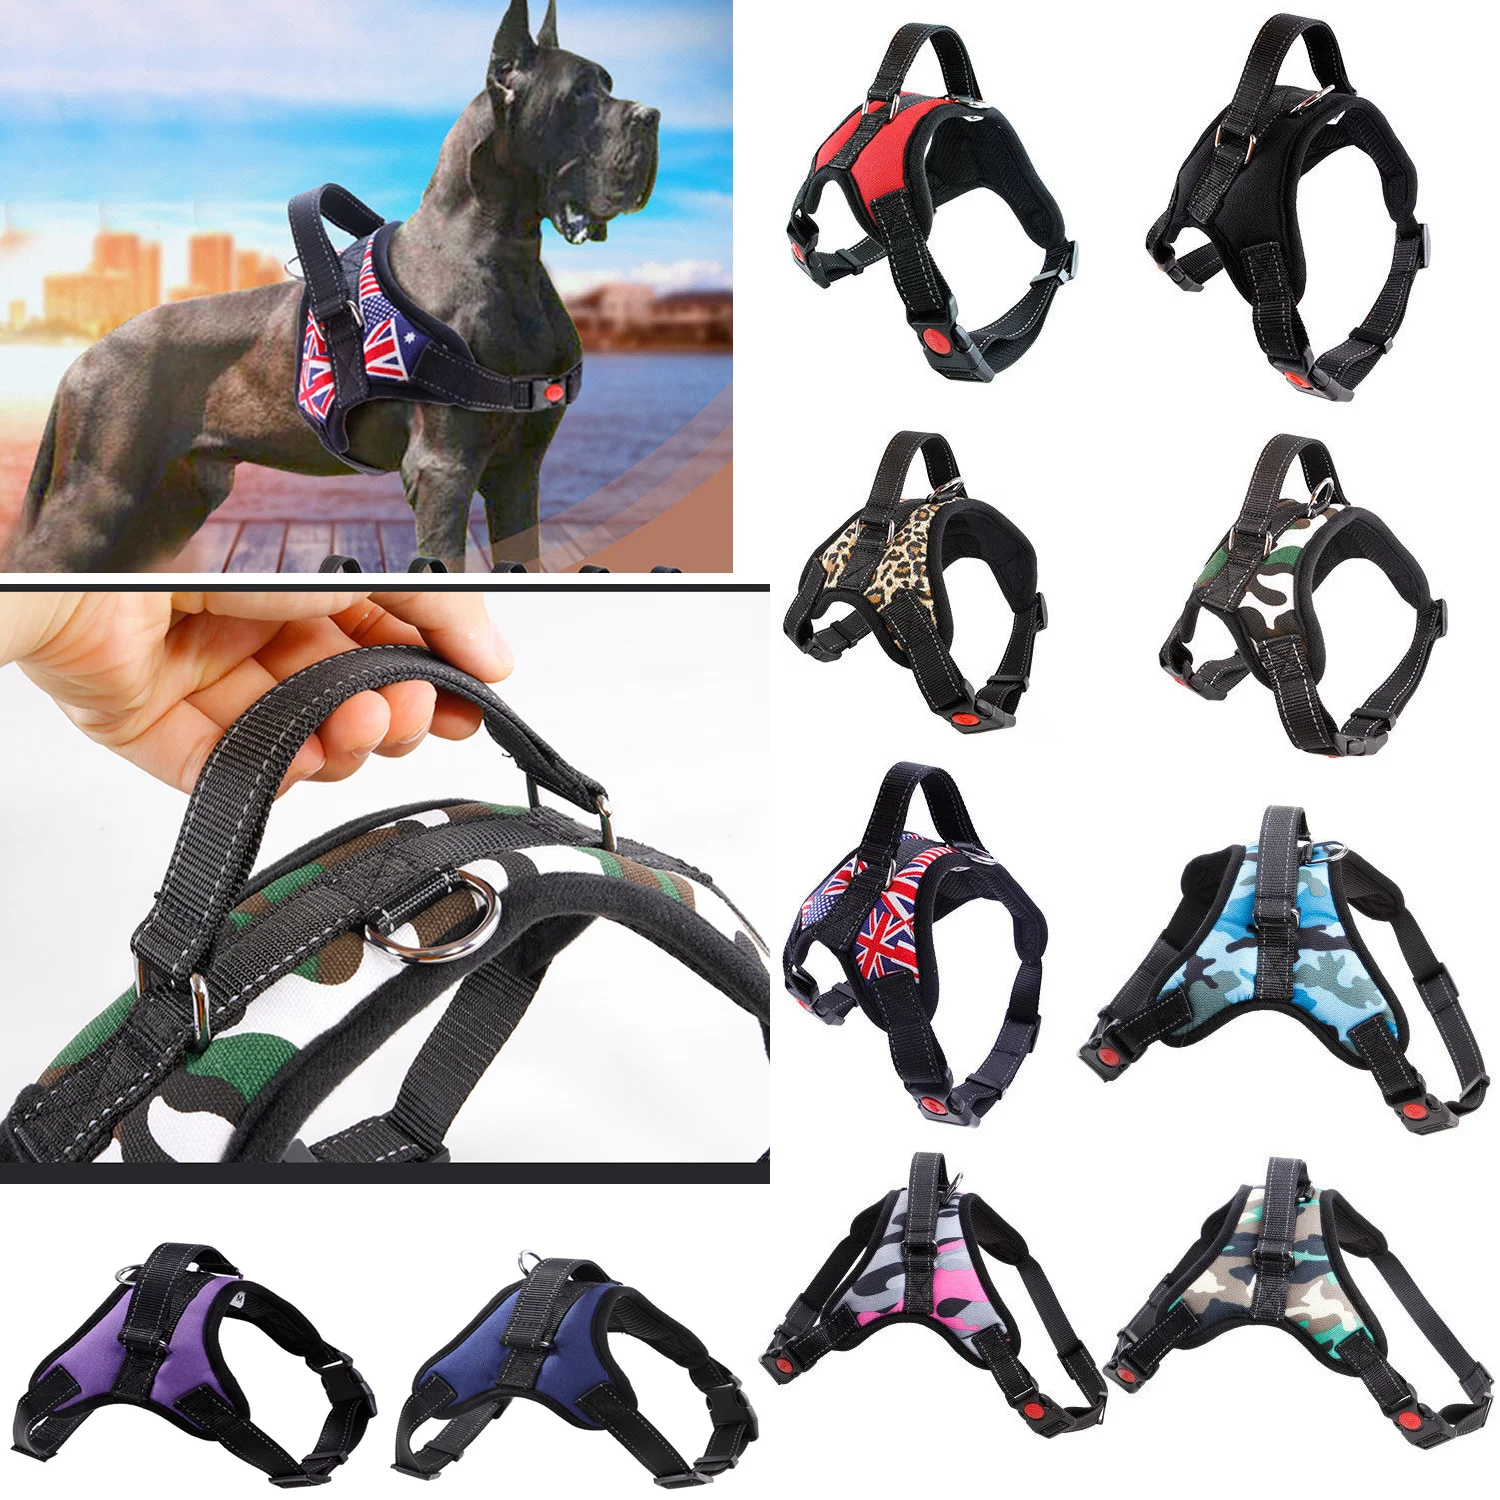 

Nylon Heavy Duty Dog Pet Harness Collar K9 Service Padded Extra Big Large Medium Small Dog Harnesses Vest for Dogs Pet Supplies